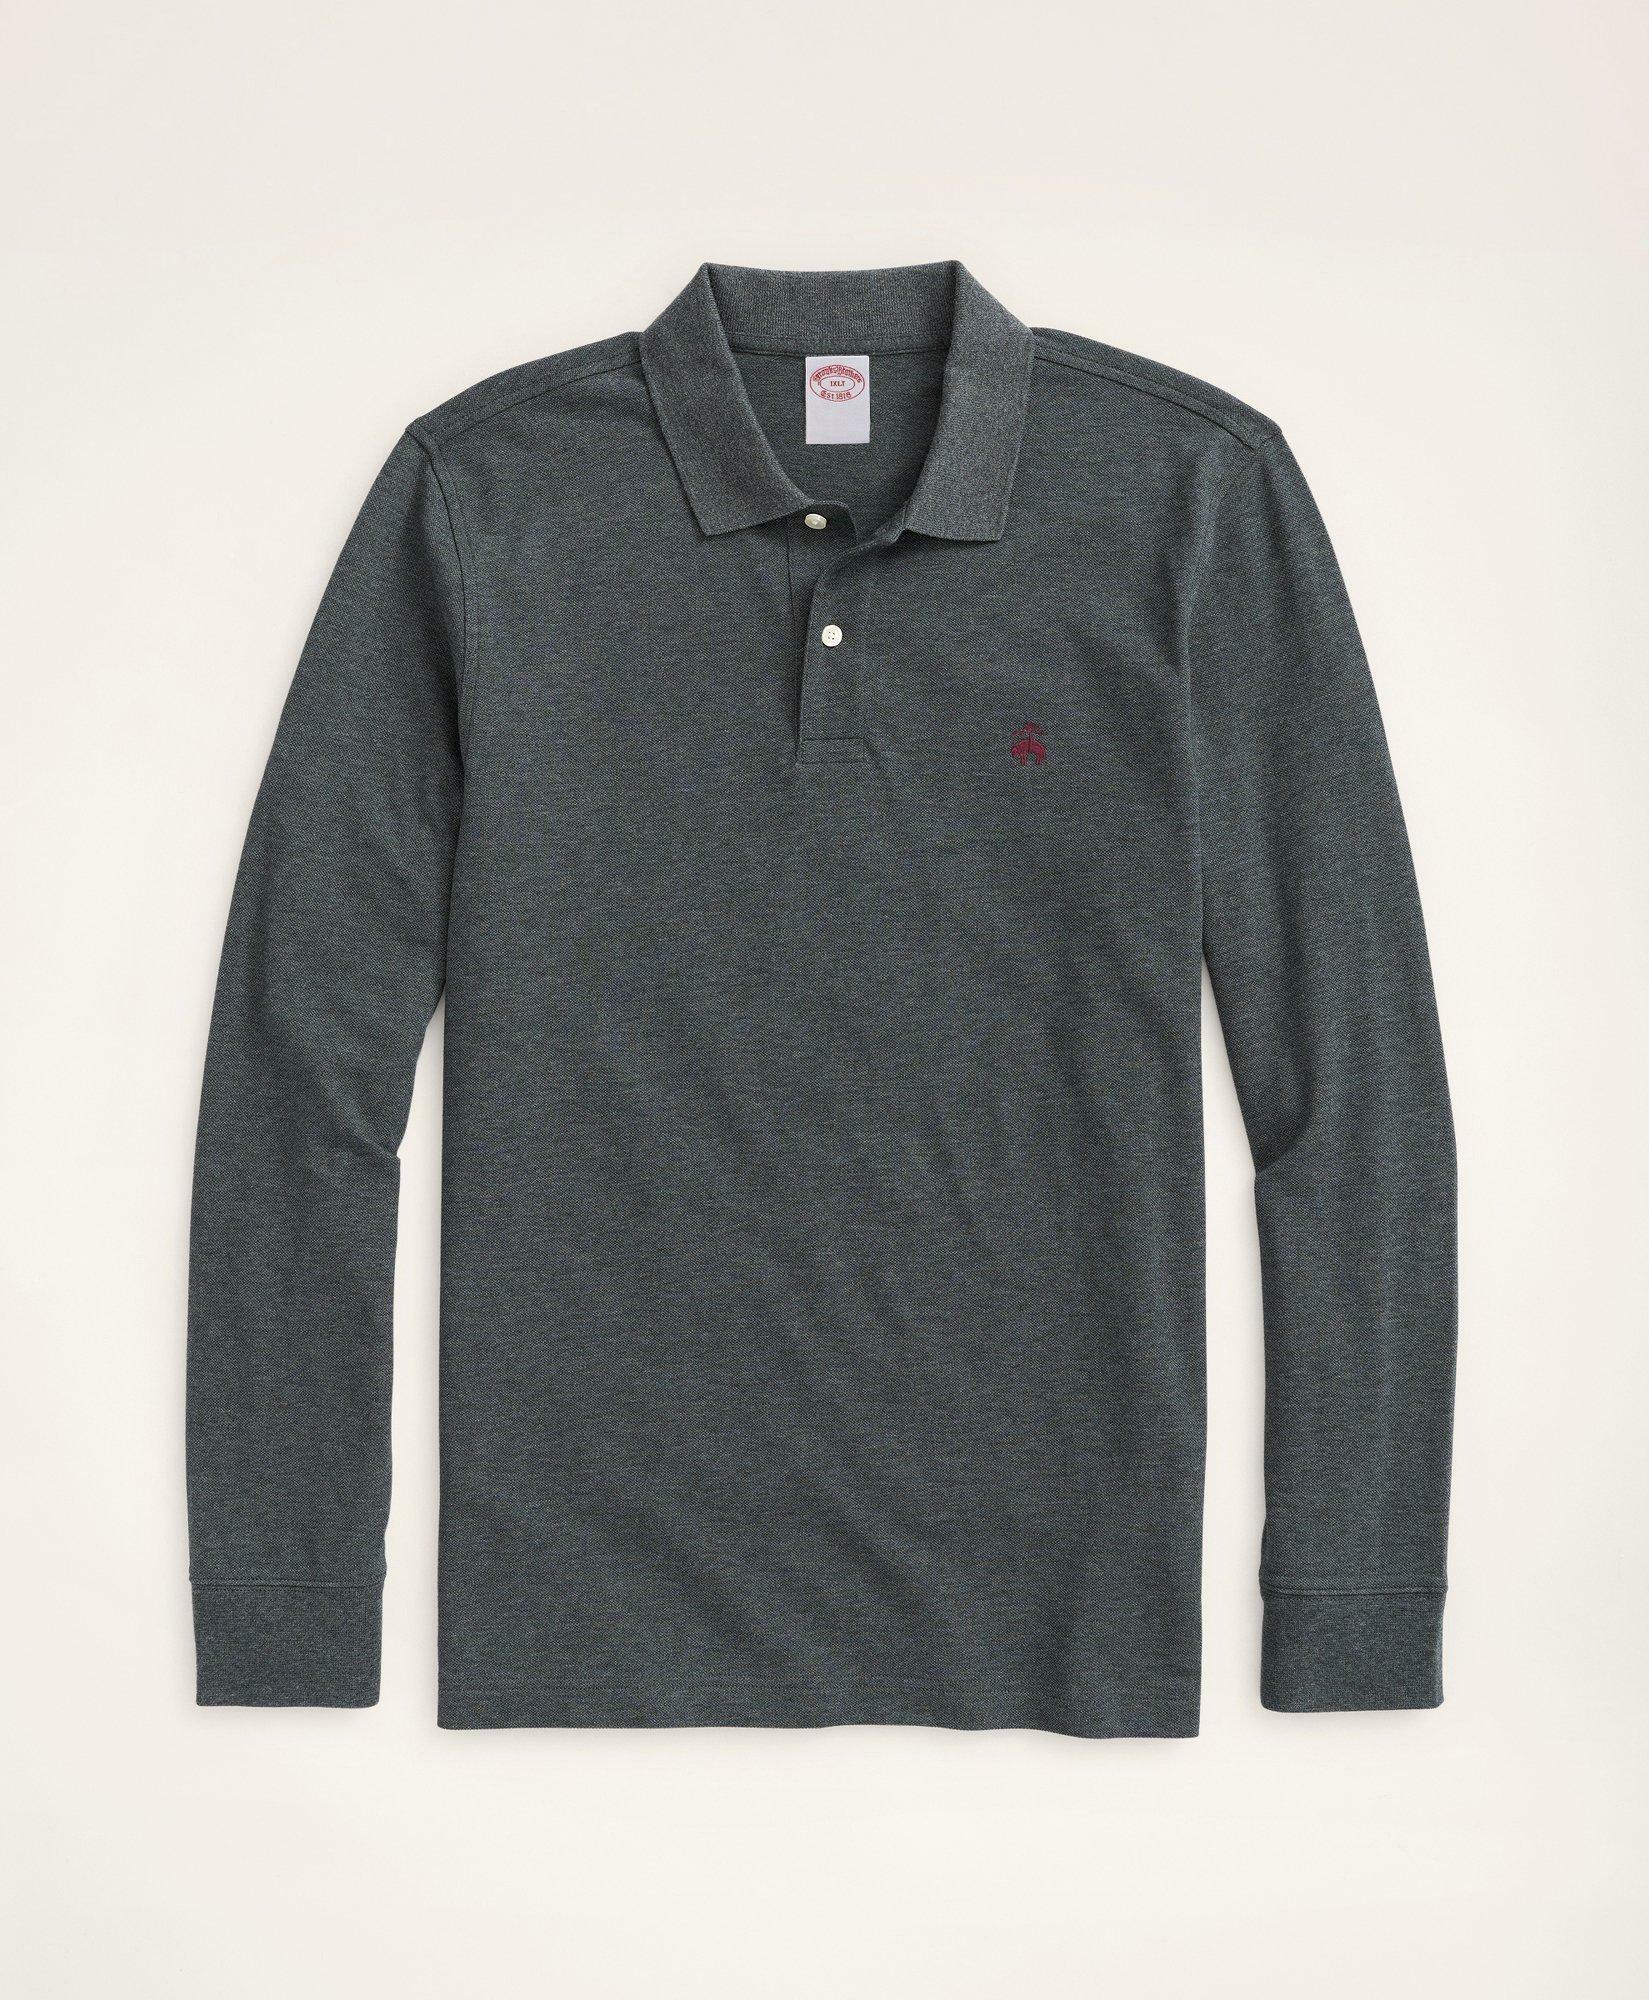 Brooks Brothers Men's Big & Tall Long-Sleeve Stretch Cotton Polo | Dark Charcoal Heather